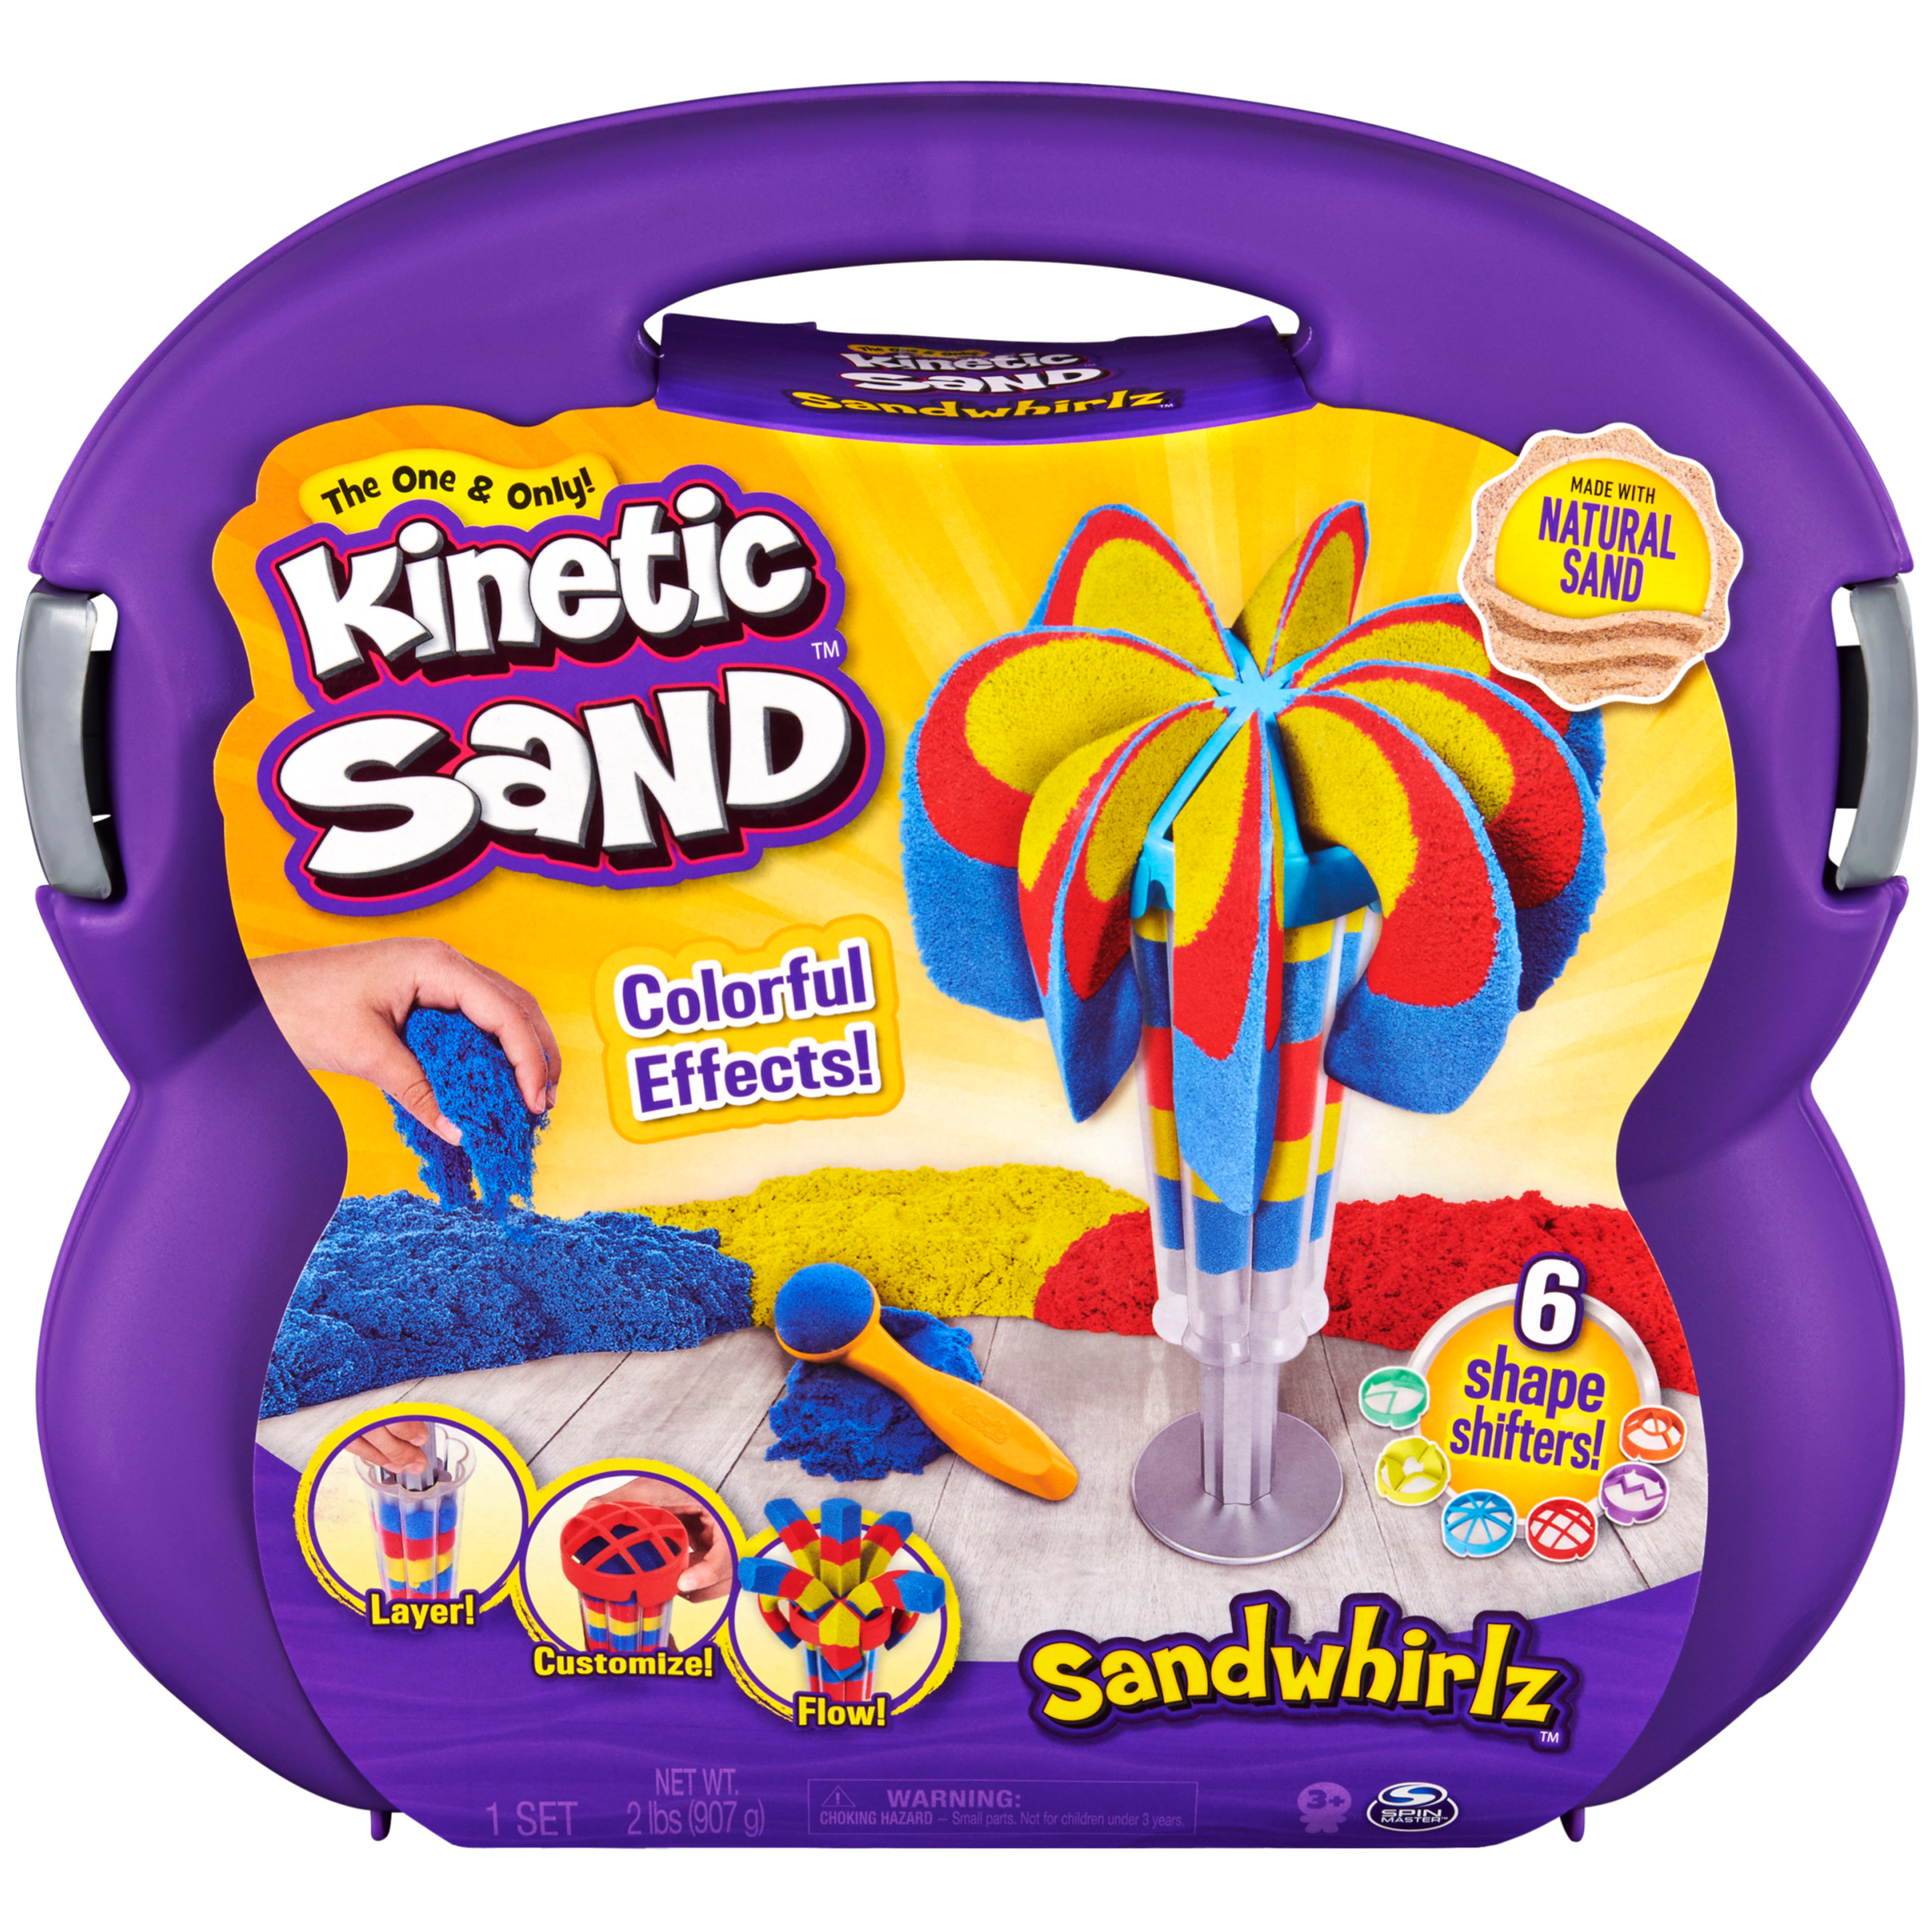 Kinetic Sand, Sandwhirlz Playset with 3 Colors of Kinetic Sand (2lbs) and Over 10 Tools, for Kids Aged 3 and up - image 1 of 10